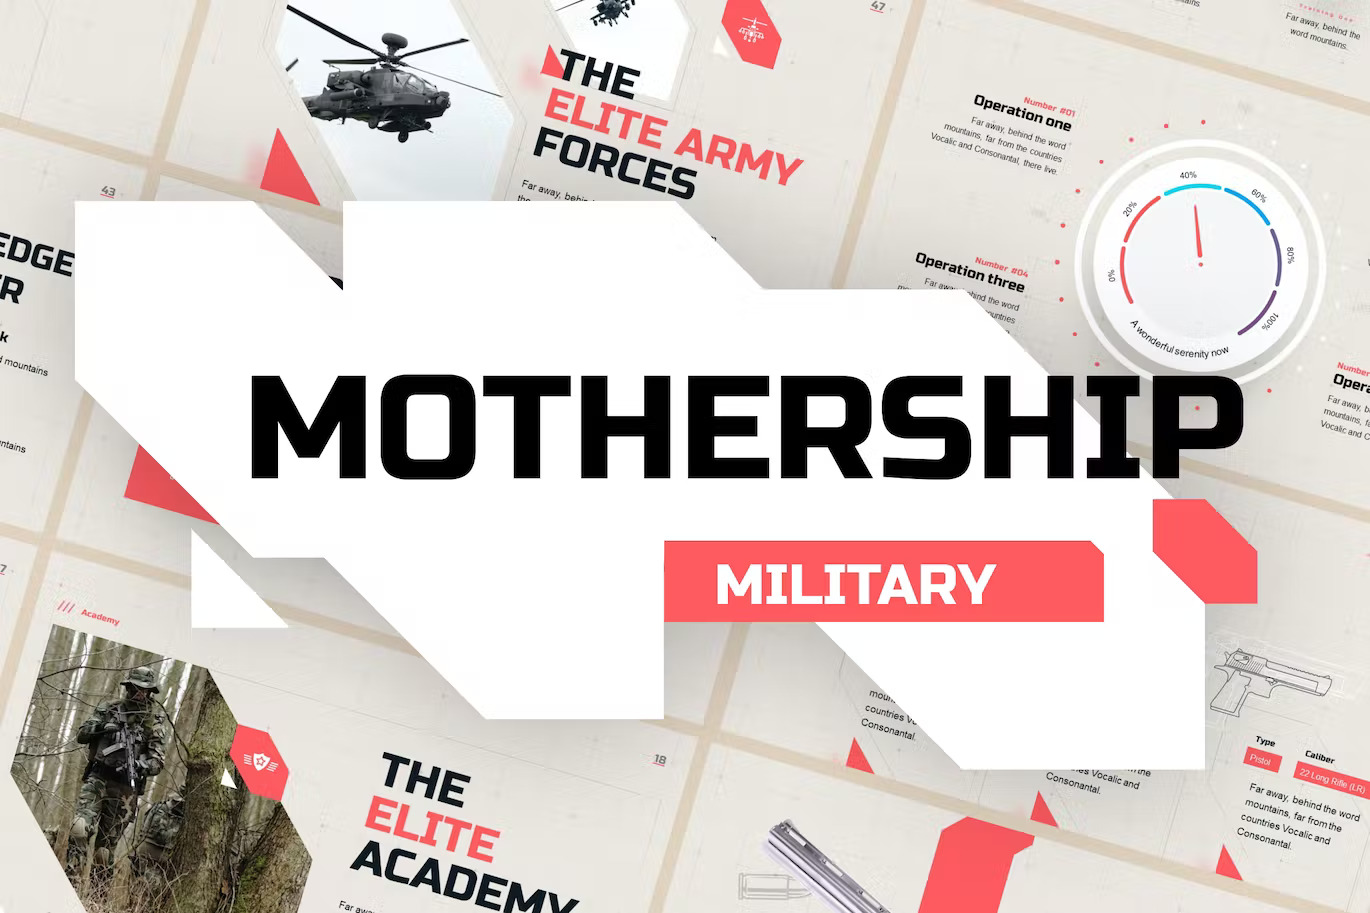 Black lettering "Mothership" on a white background and white lettering "Military" on a pink background and different presentation templates.